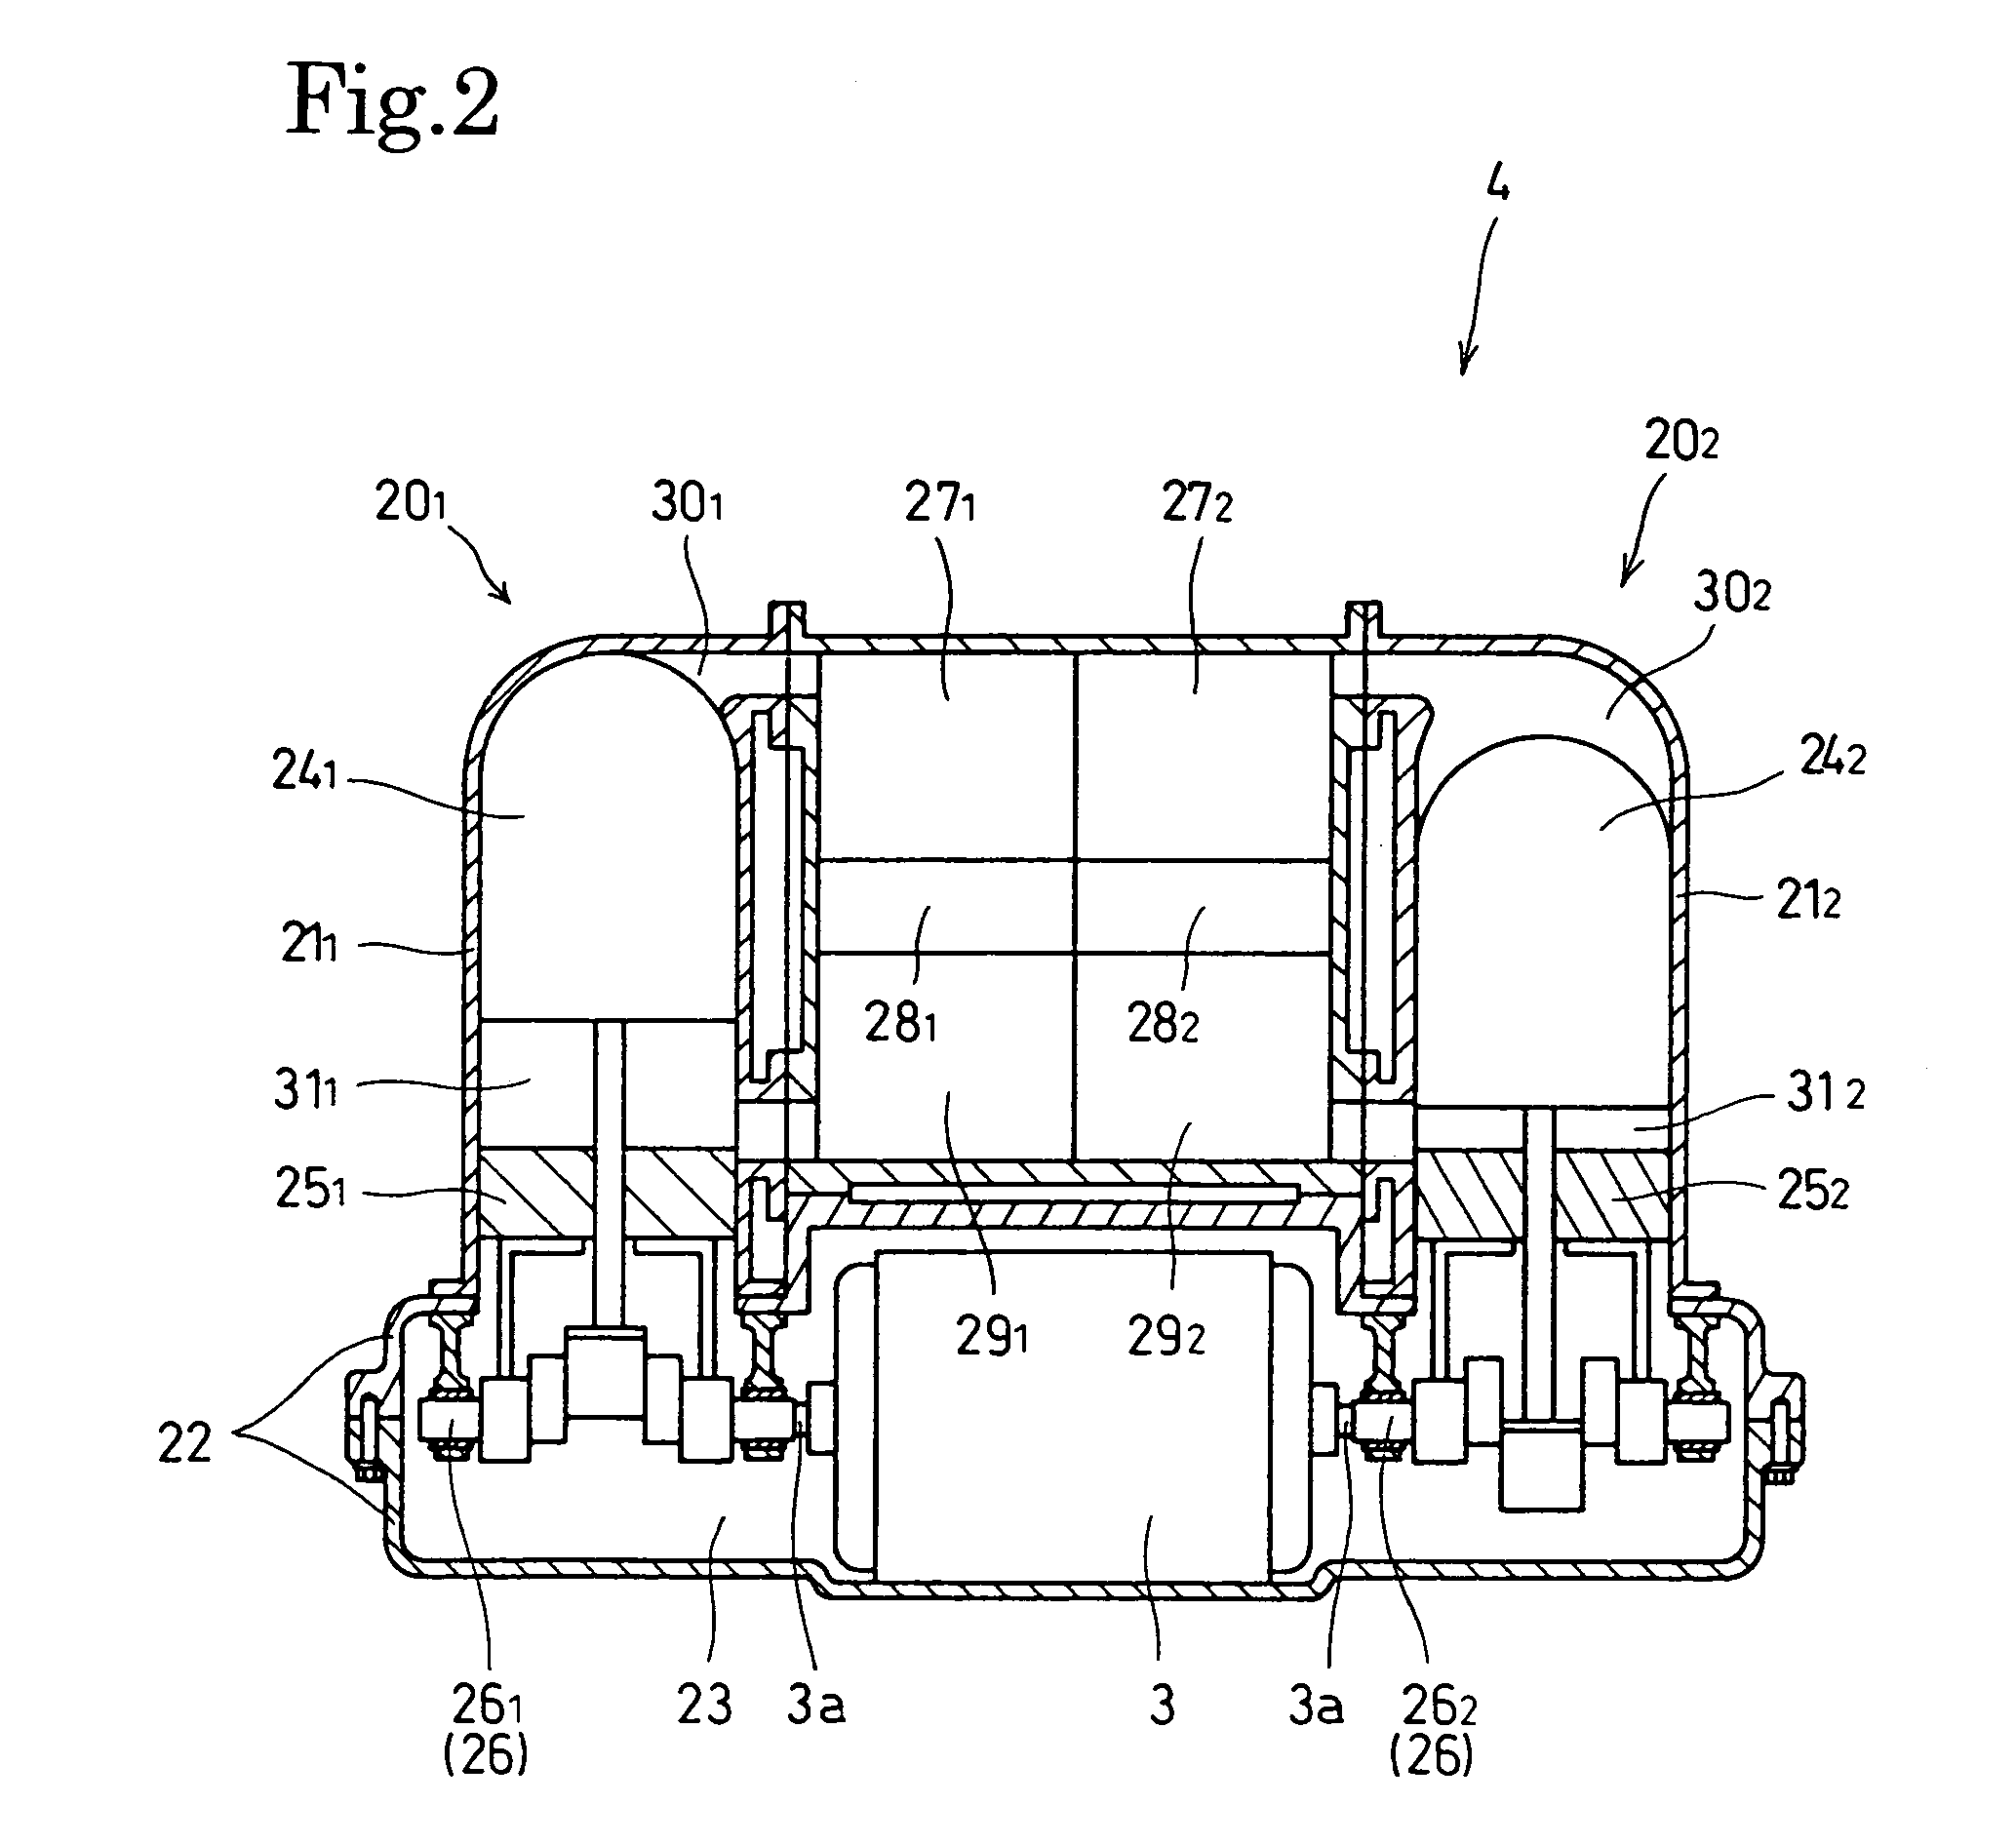 Power device equipped with combustion engine and stirling engine